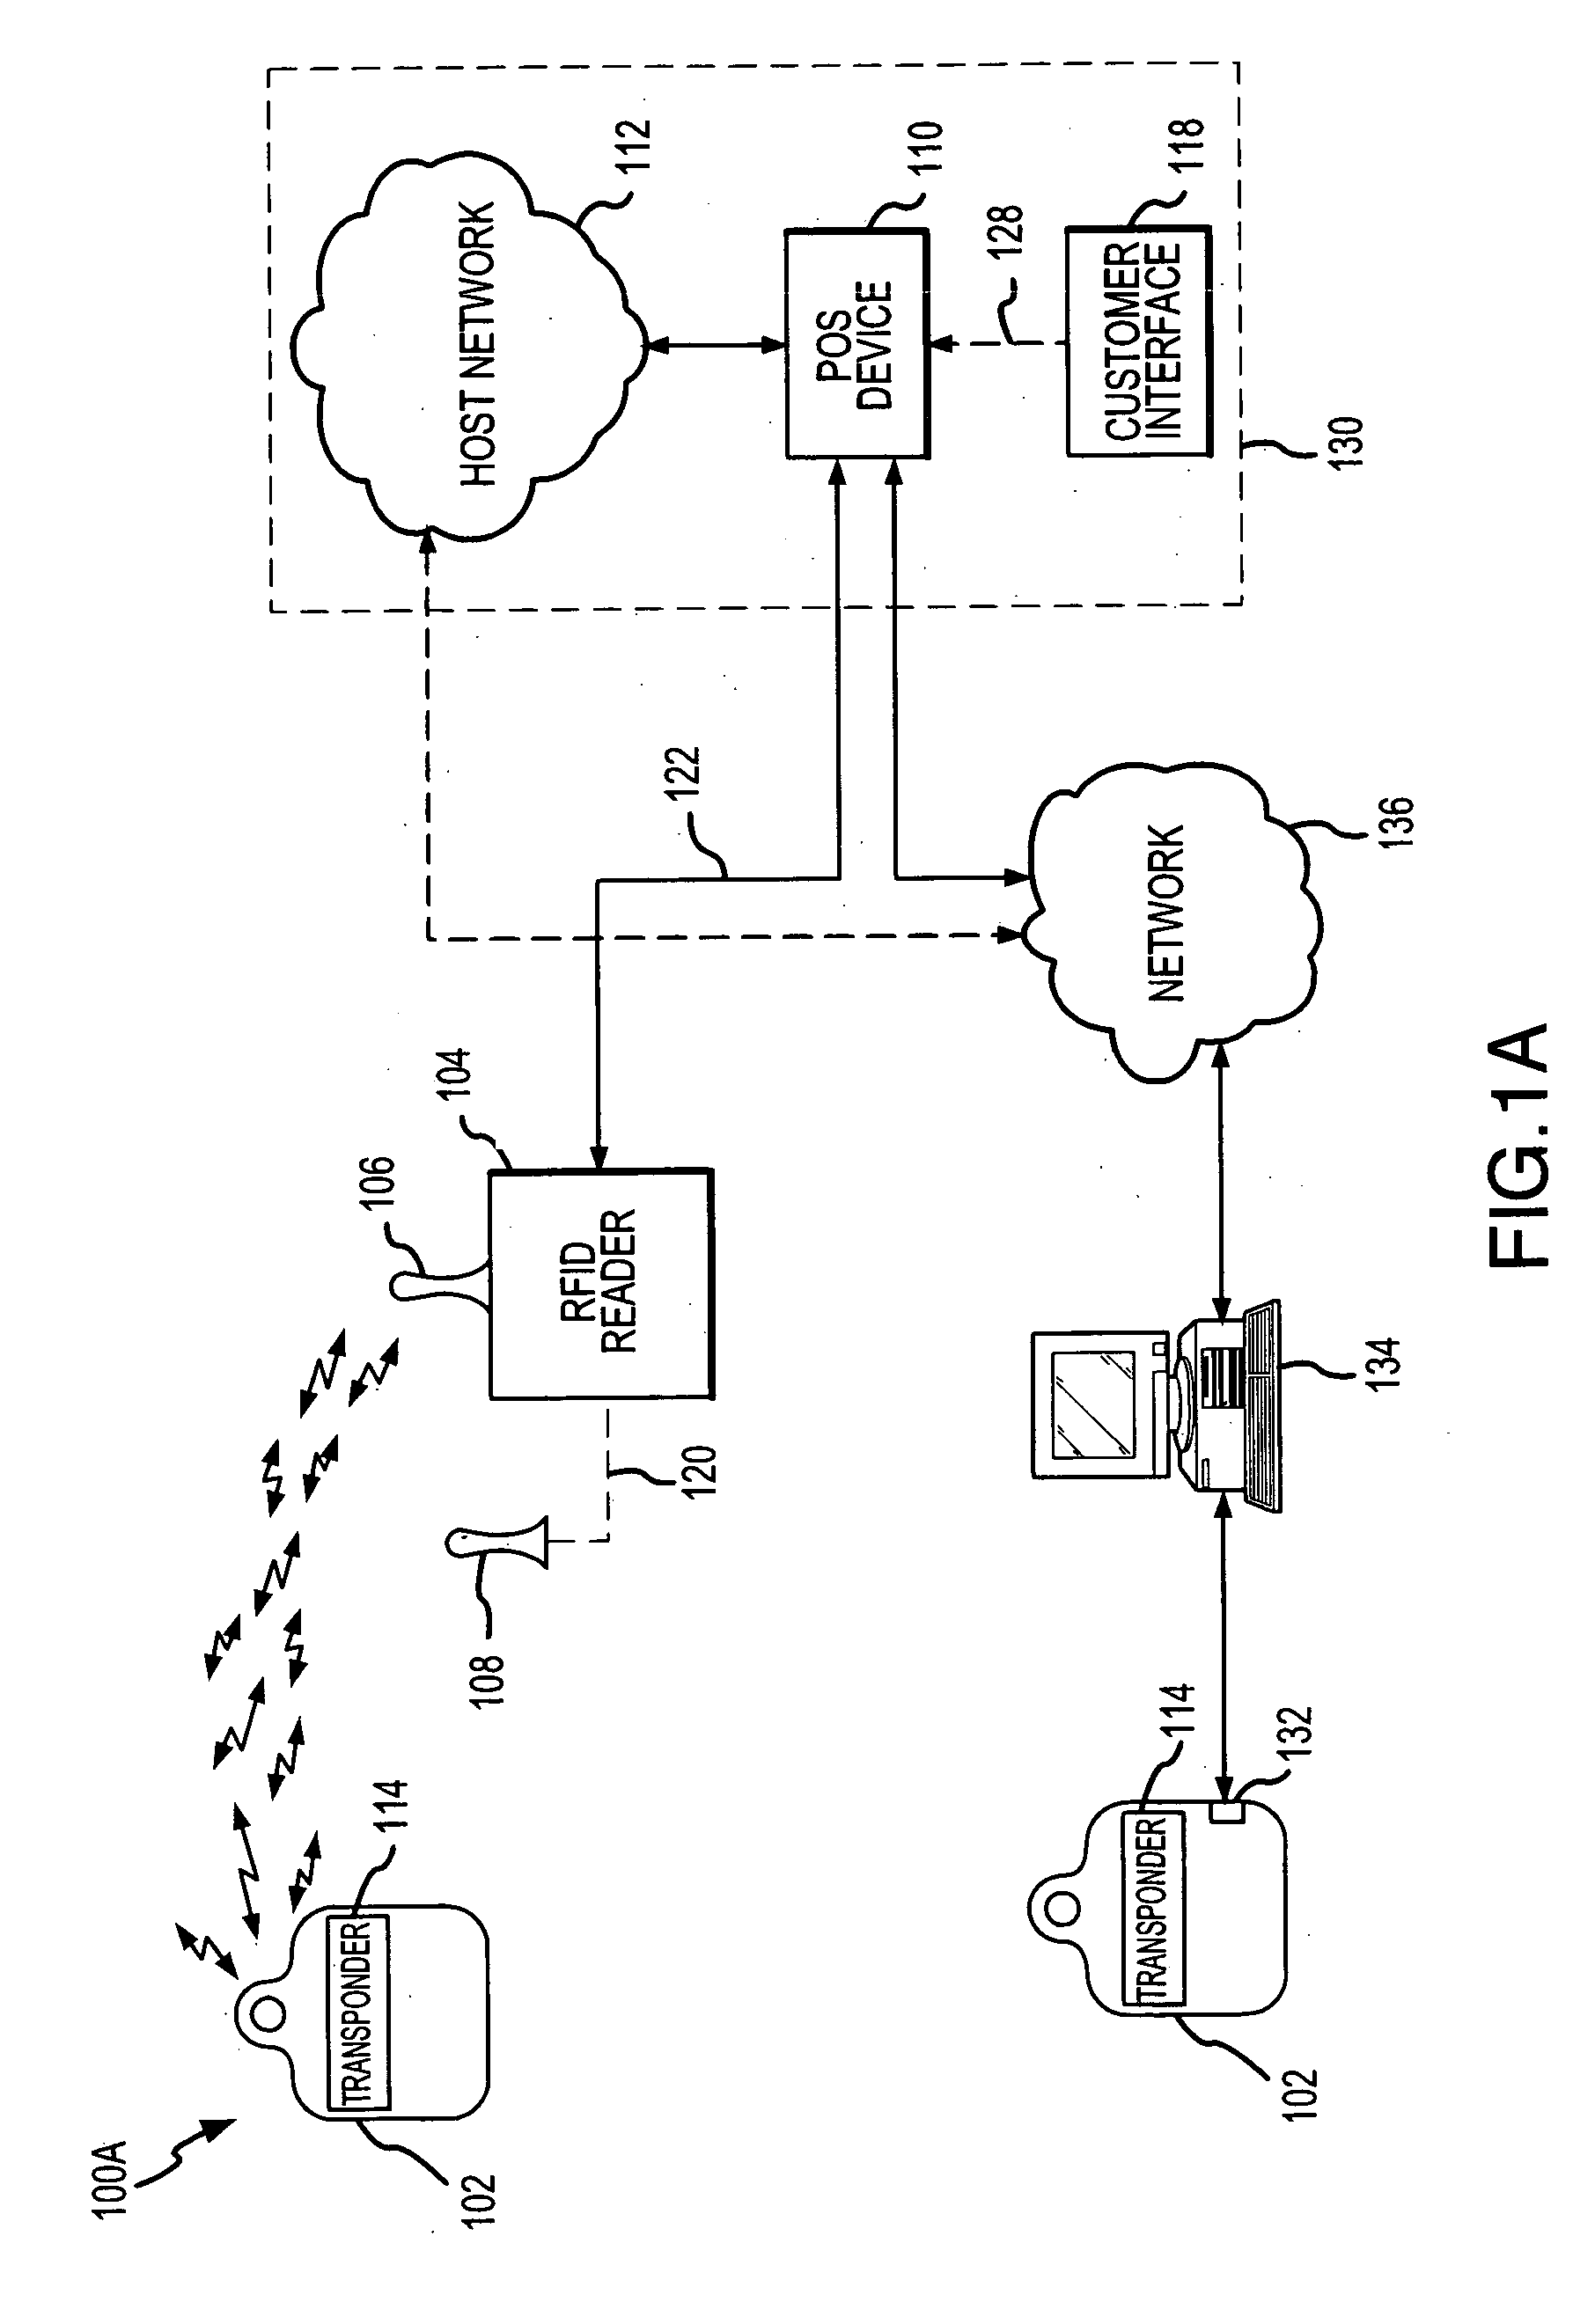 System and method for transmitting track 1/track 2 formatted information via Radio Frequency